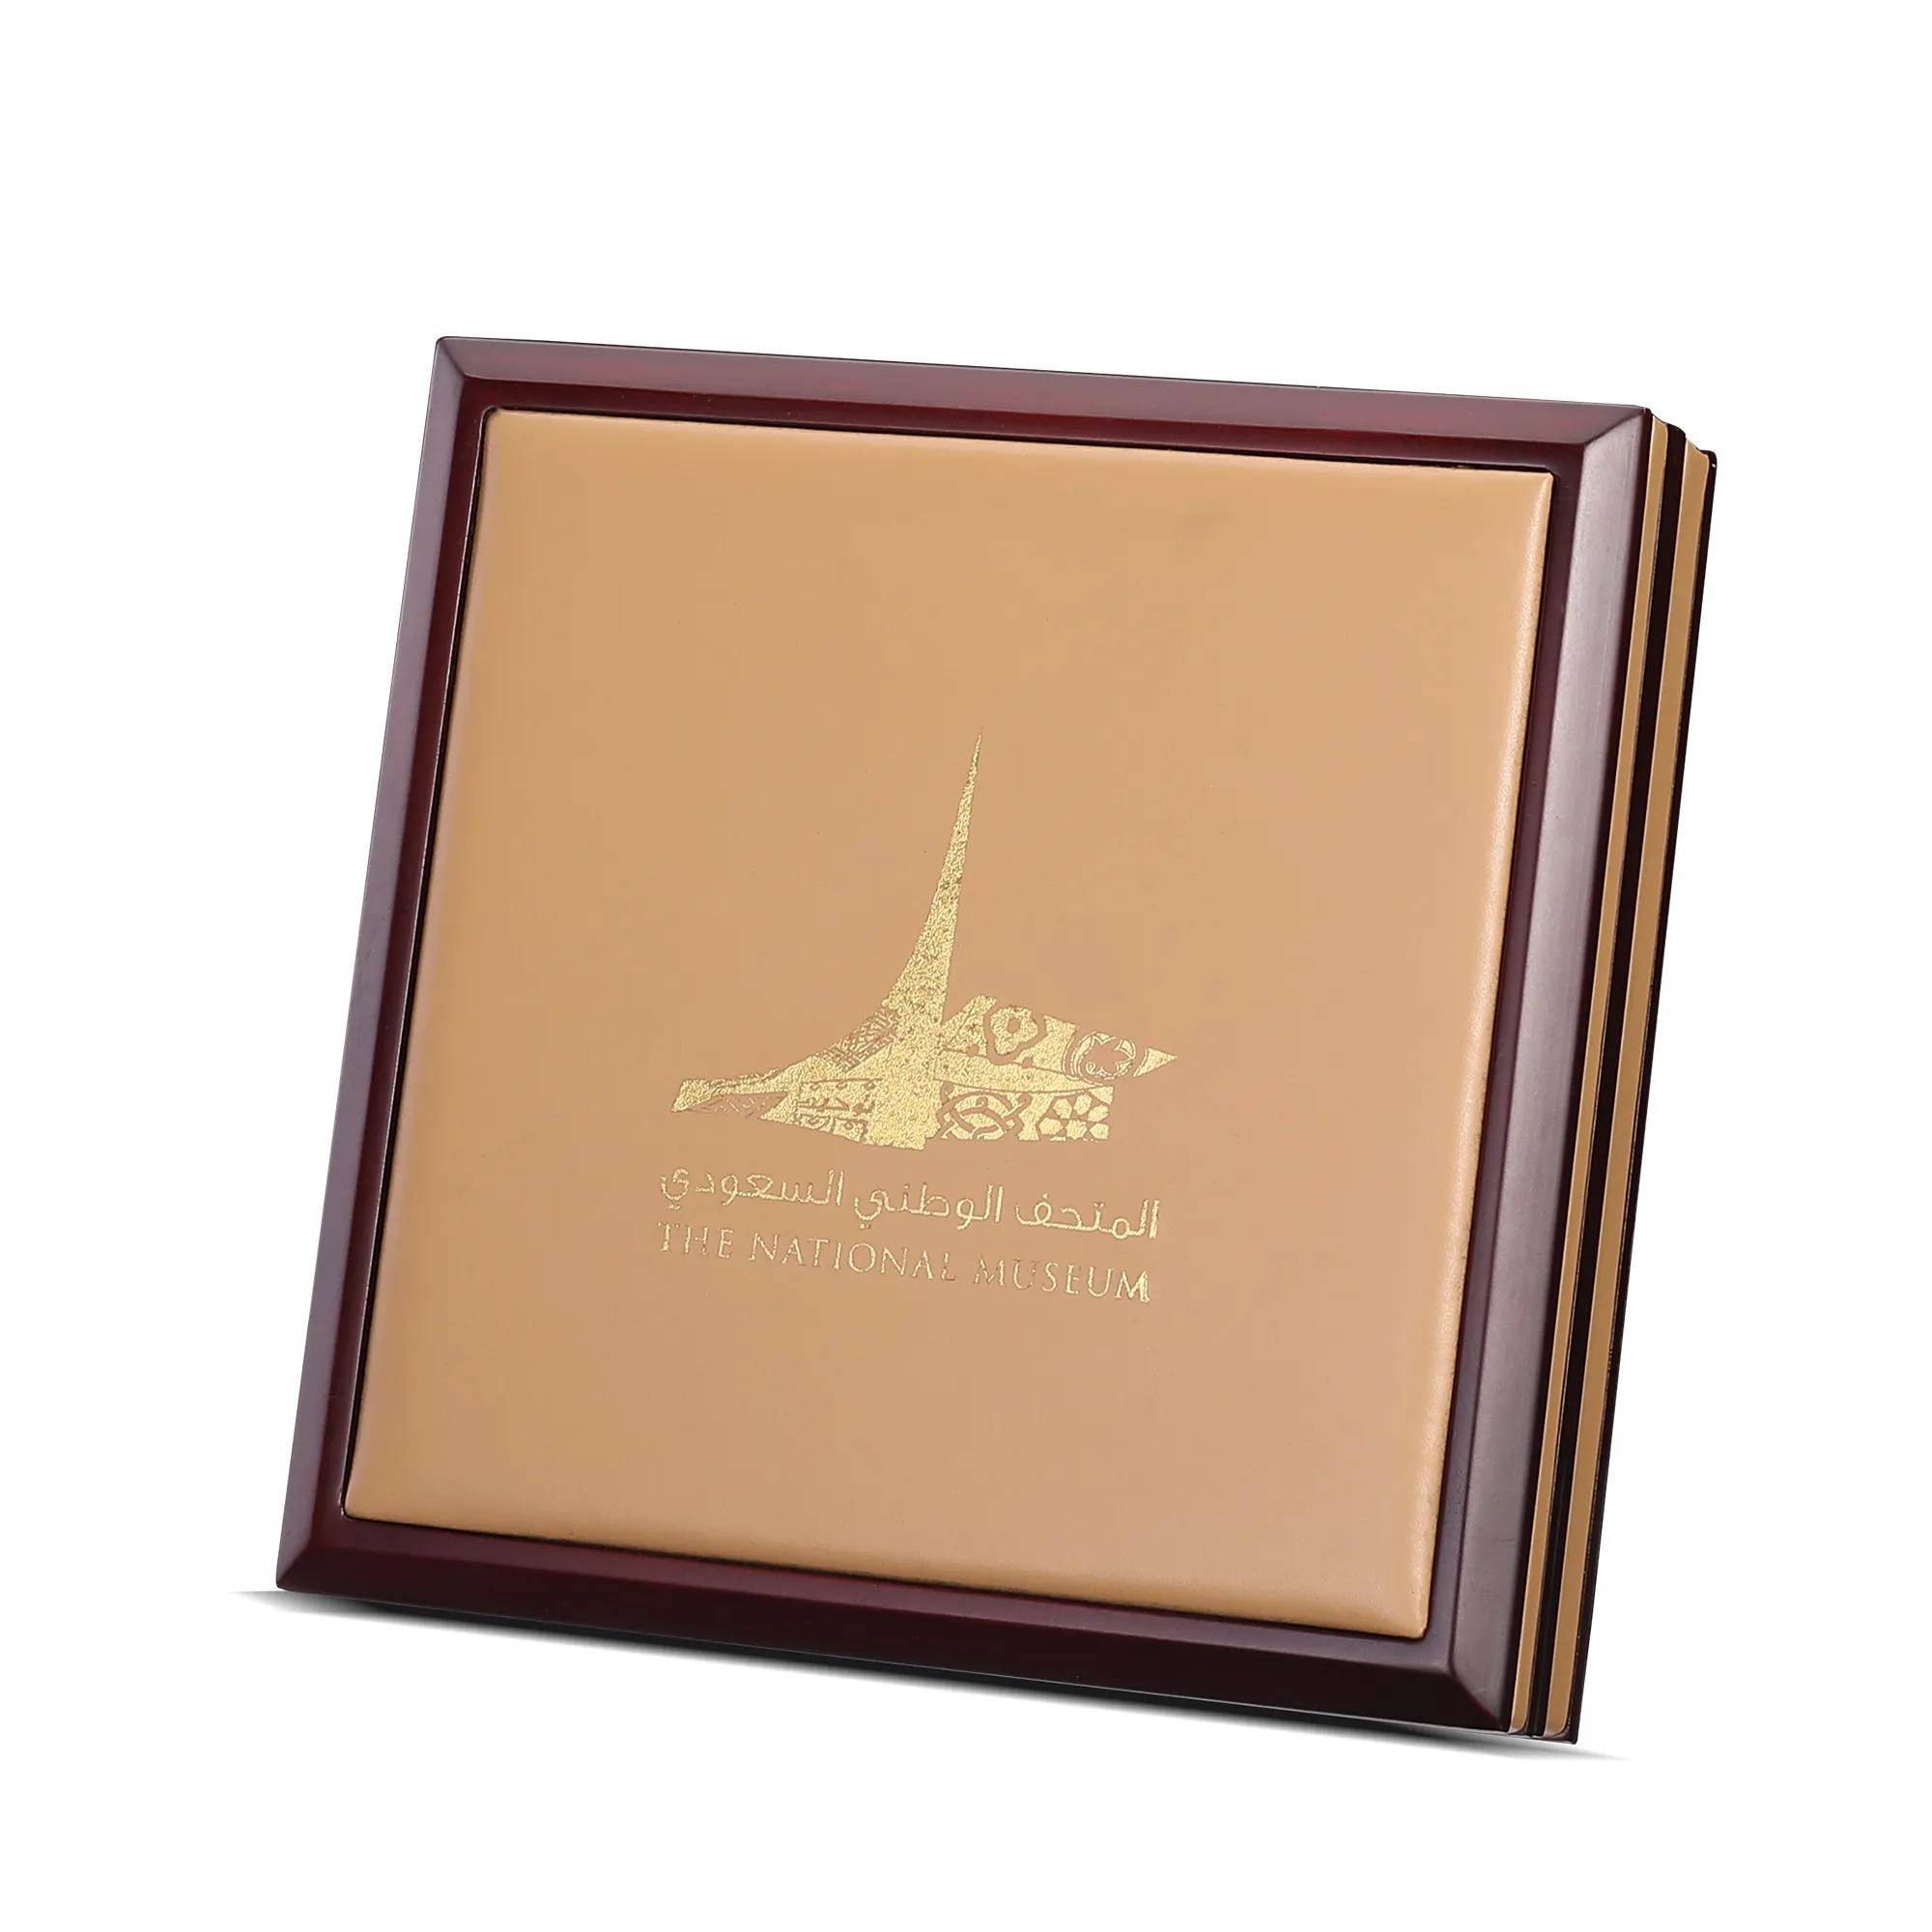 New Idea New Material Square Shape Wood Box Customized Label Brown Leather Wood Box with High Quality Premium Dates Box